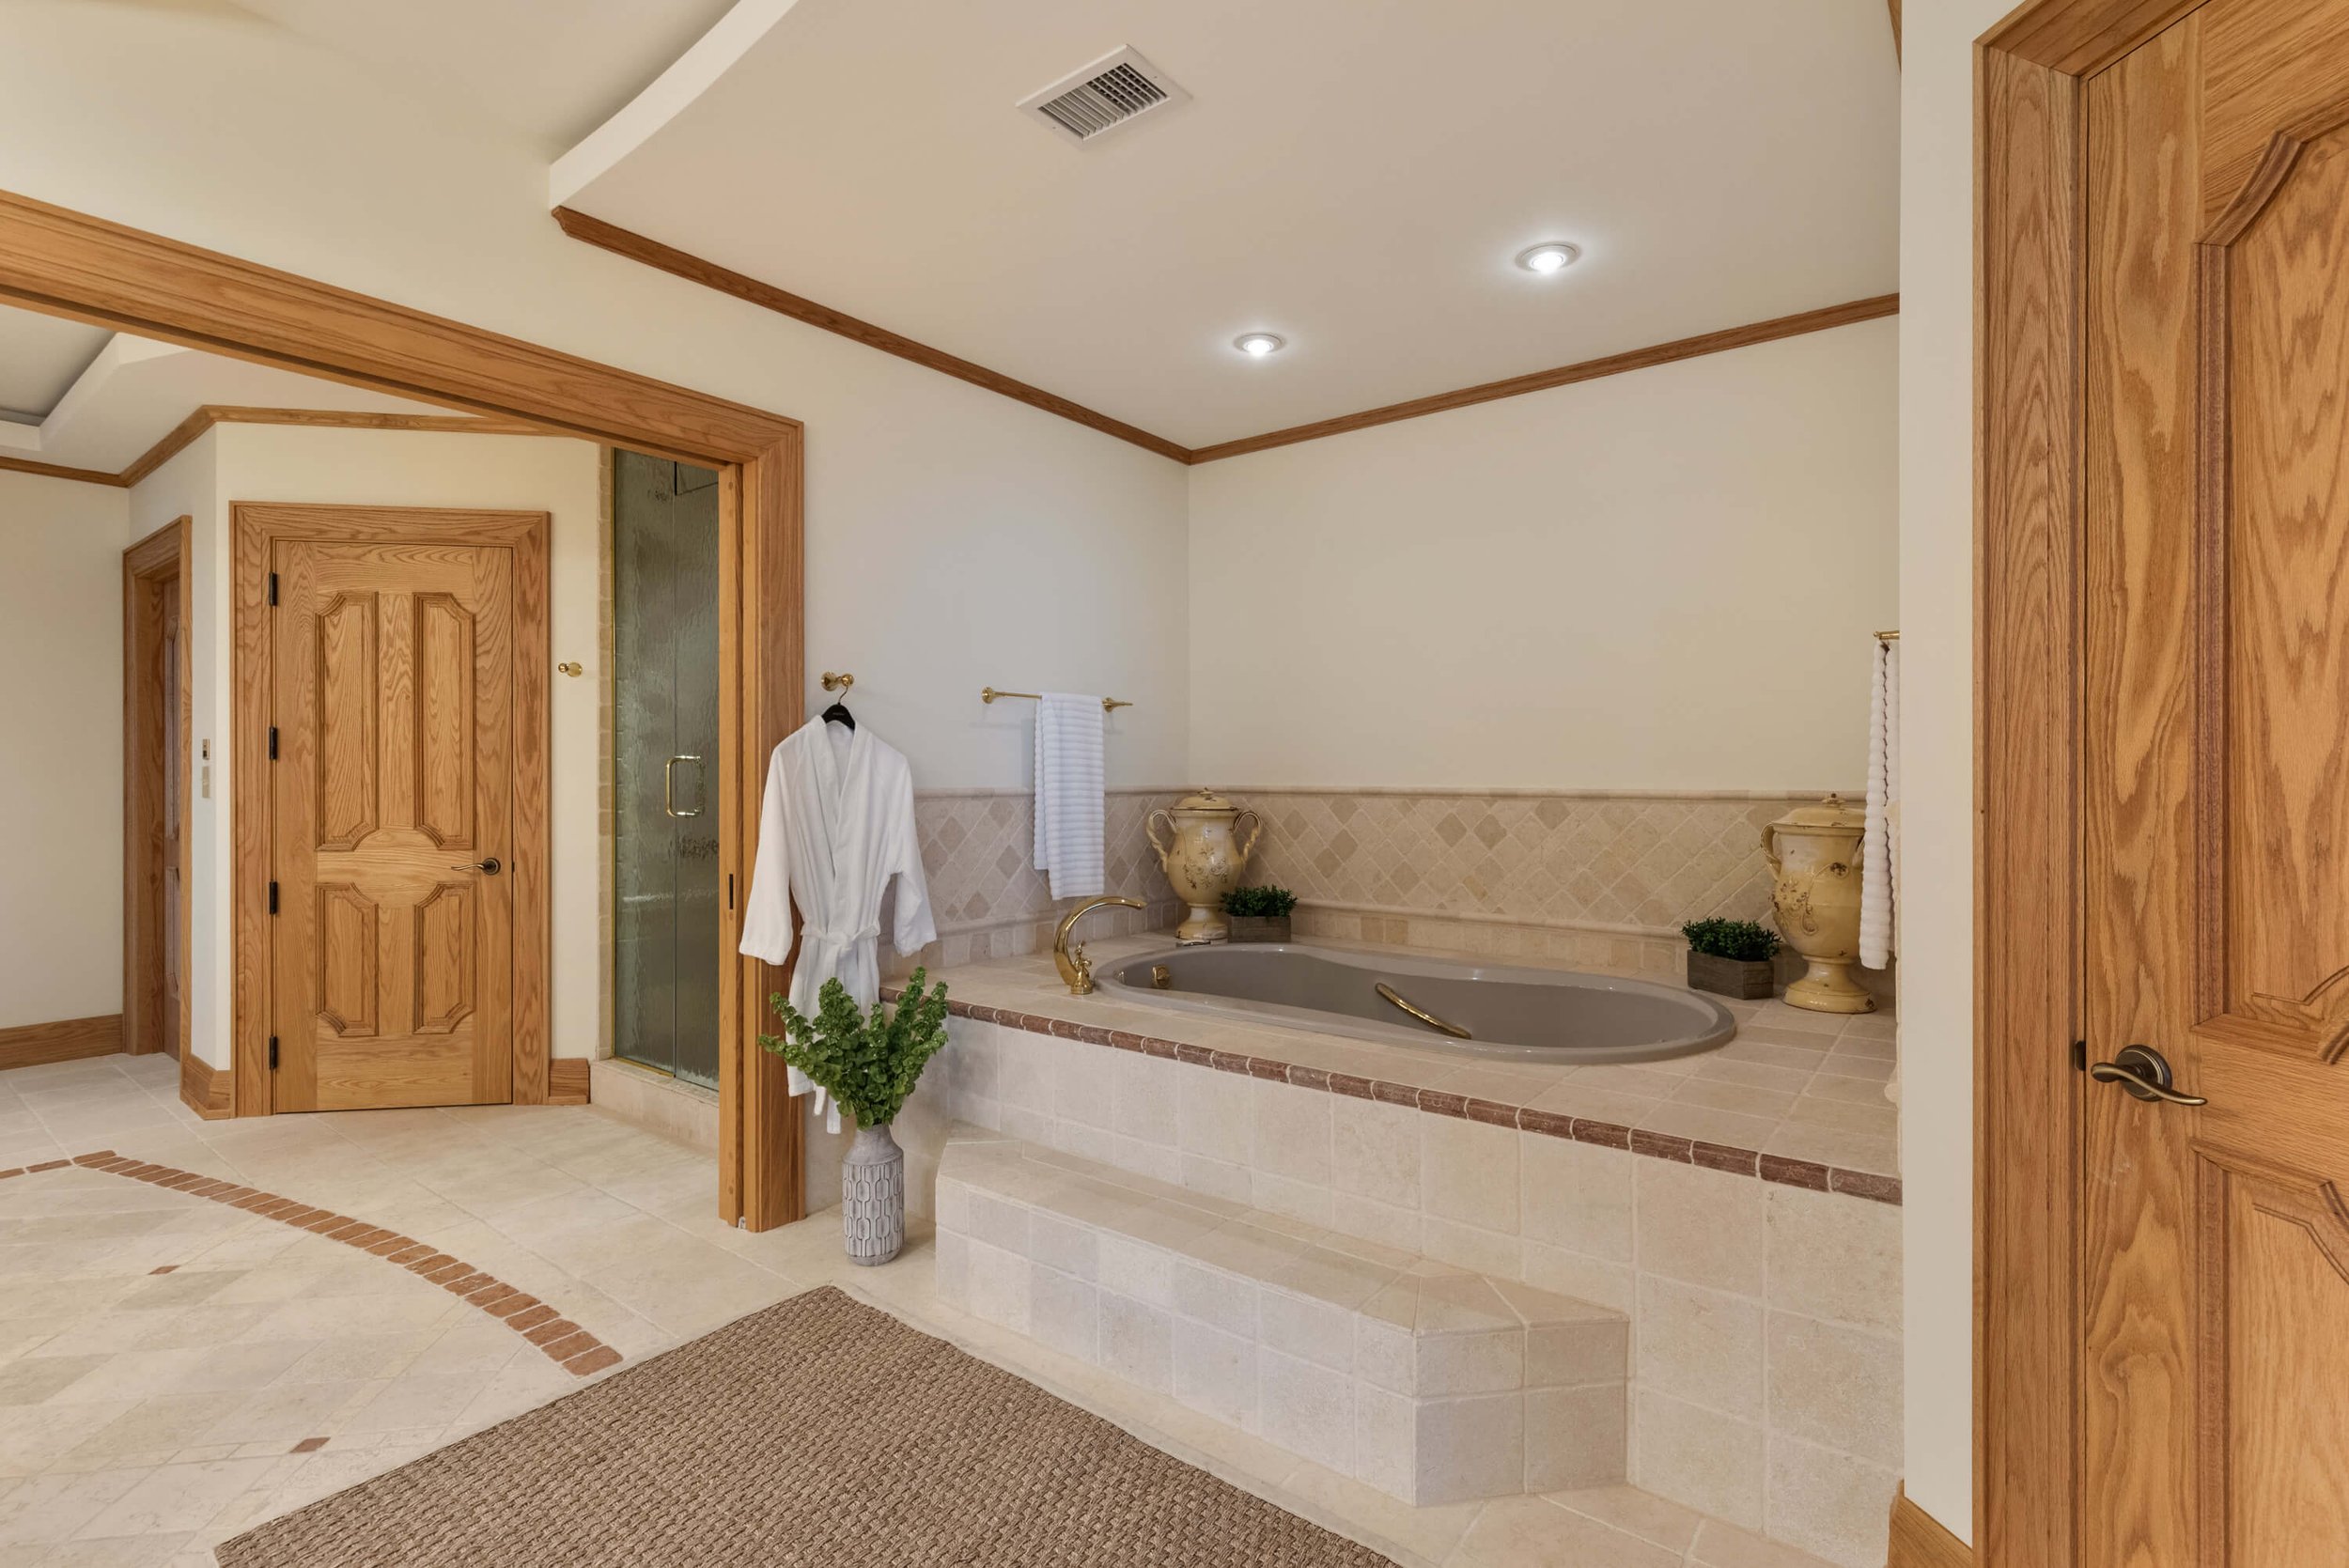 Large Whirlpool Tub and Walk-In Shower